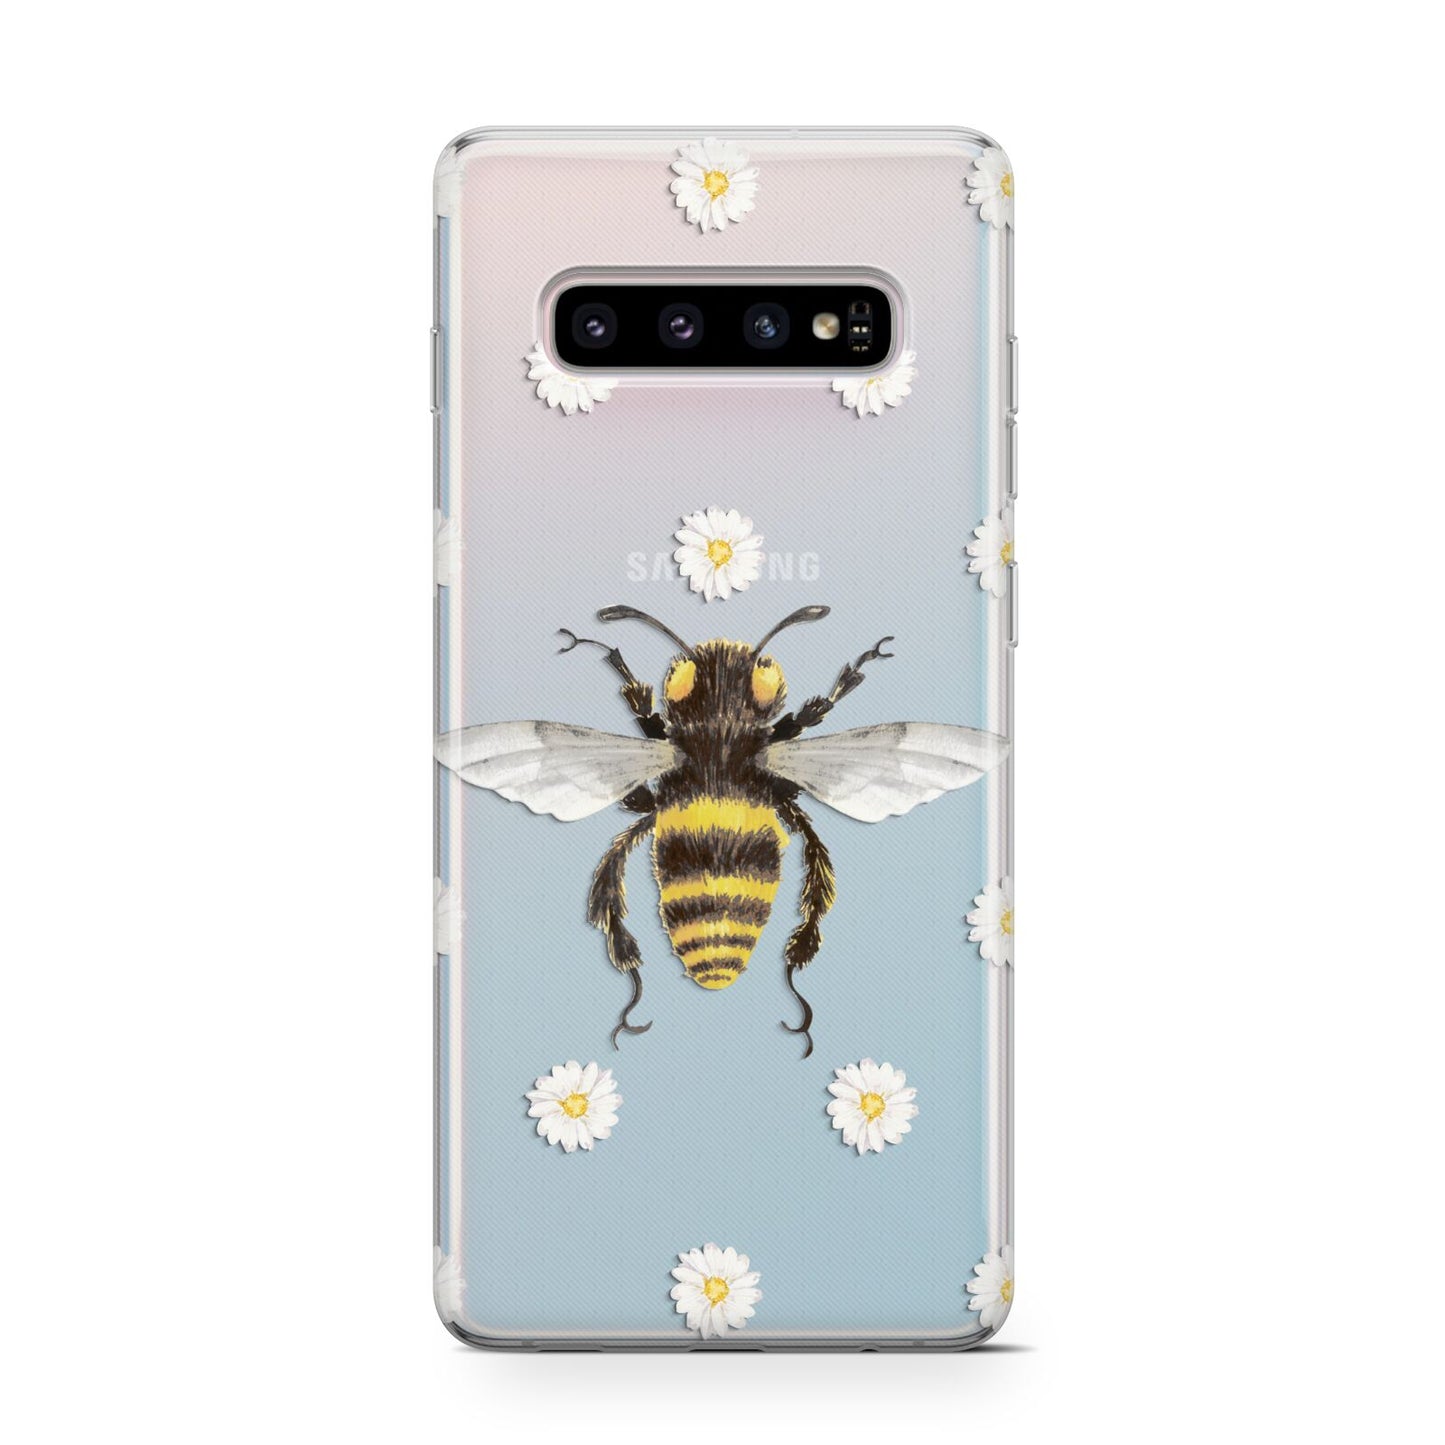 Bee Illustration with Daisies Samsung Galaxy S10 Case